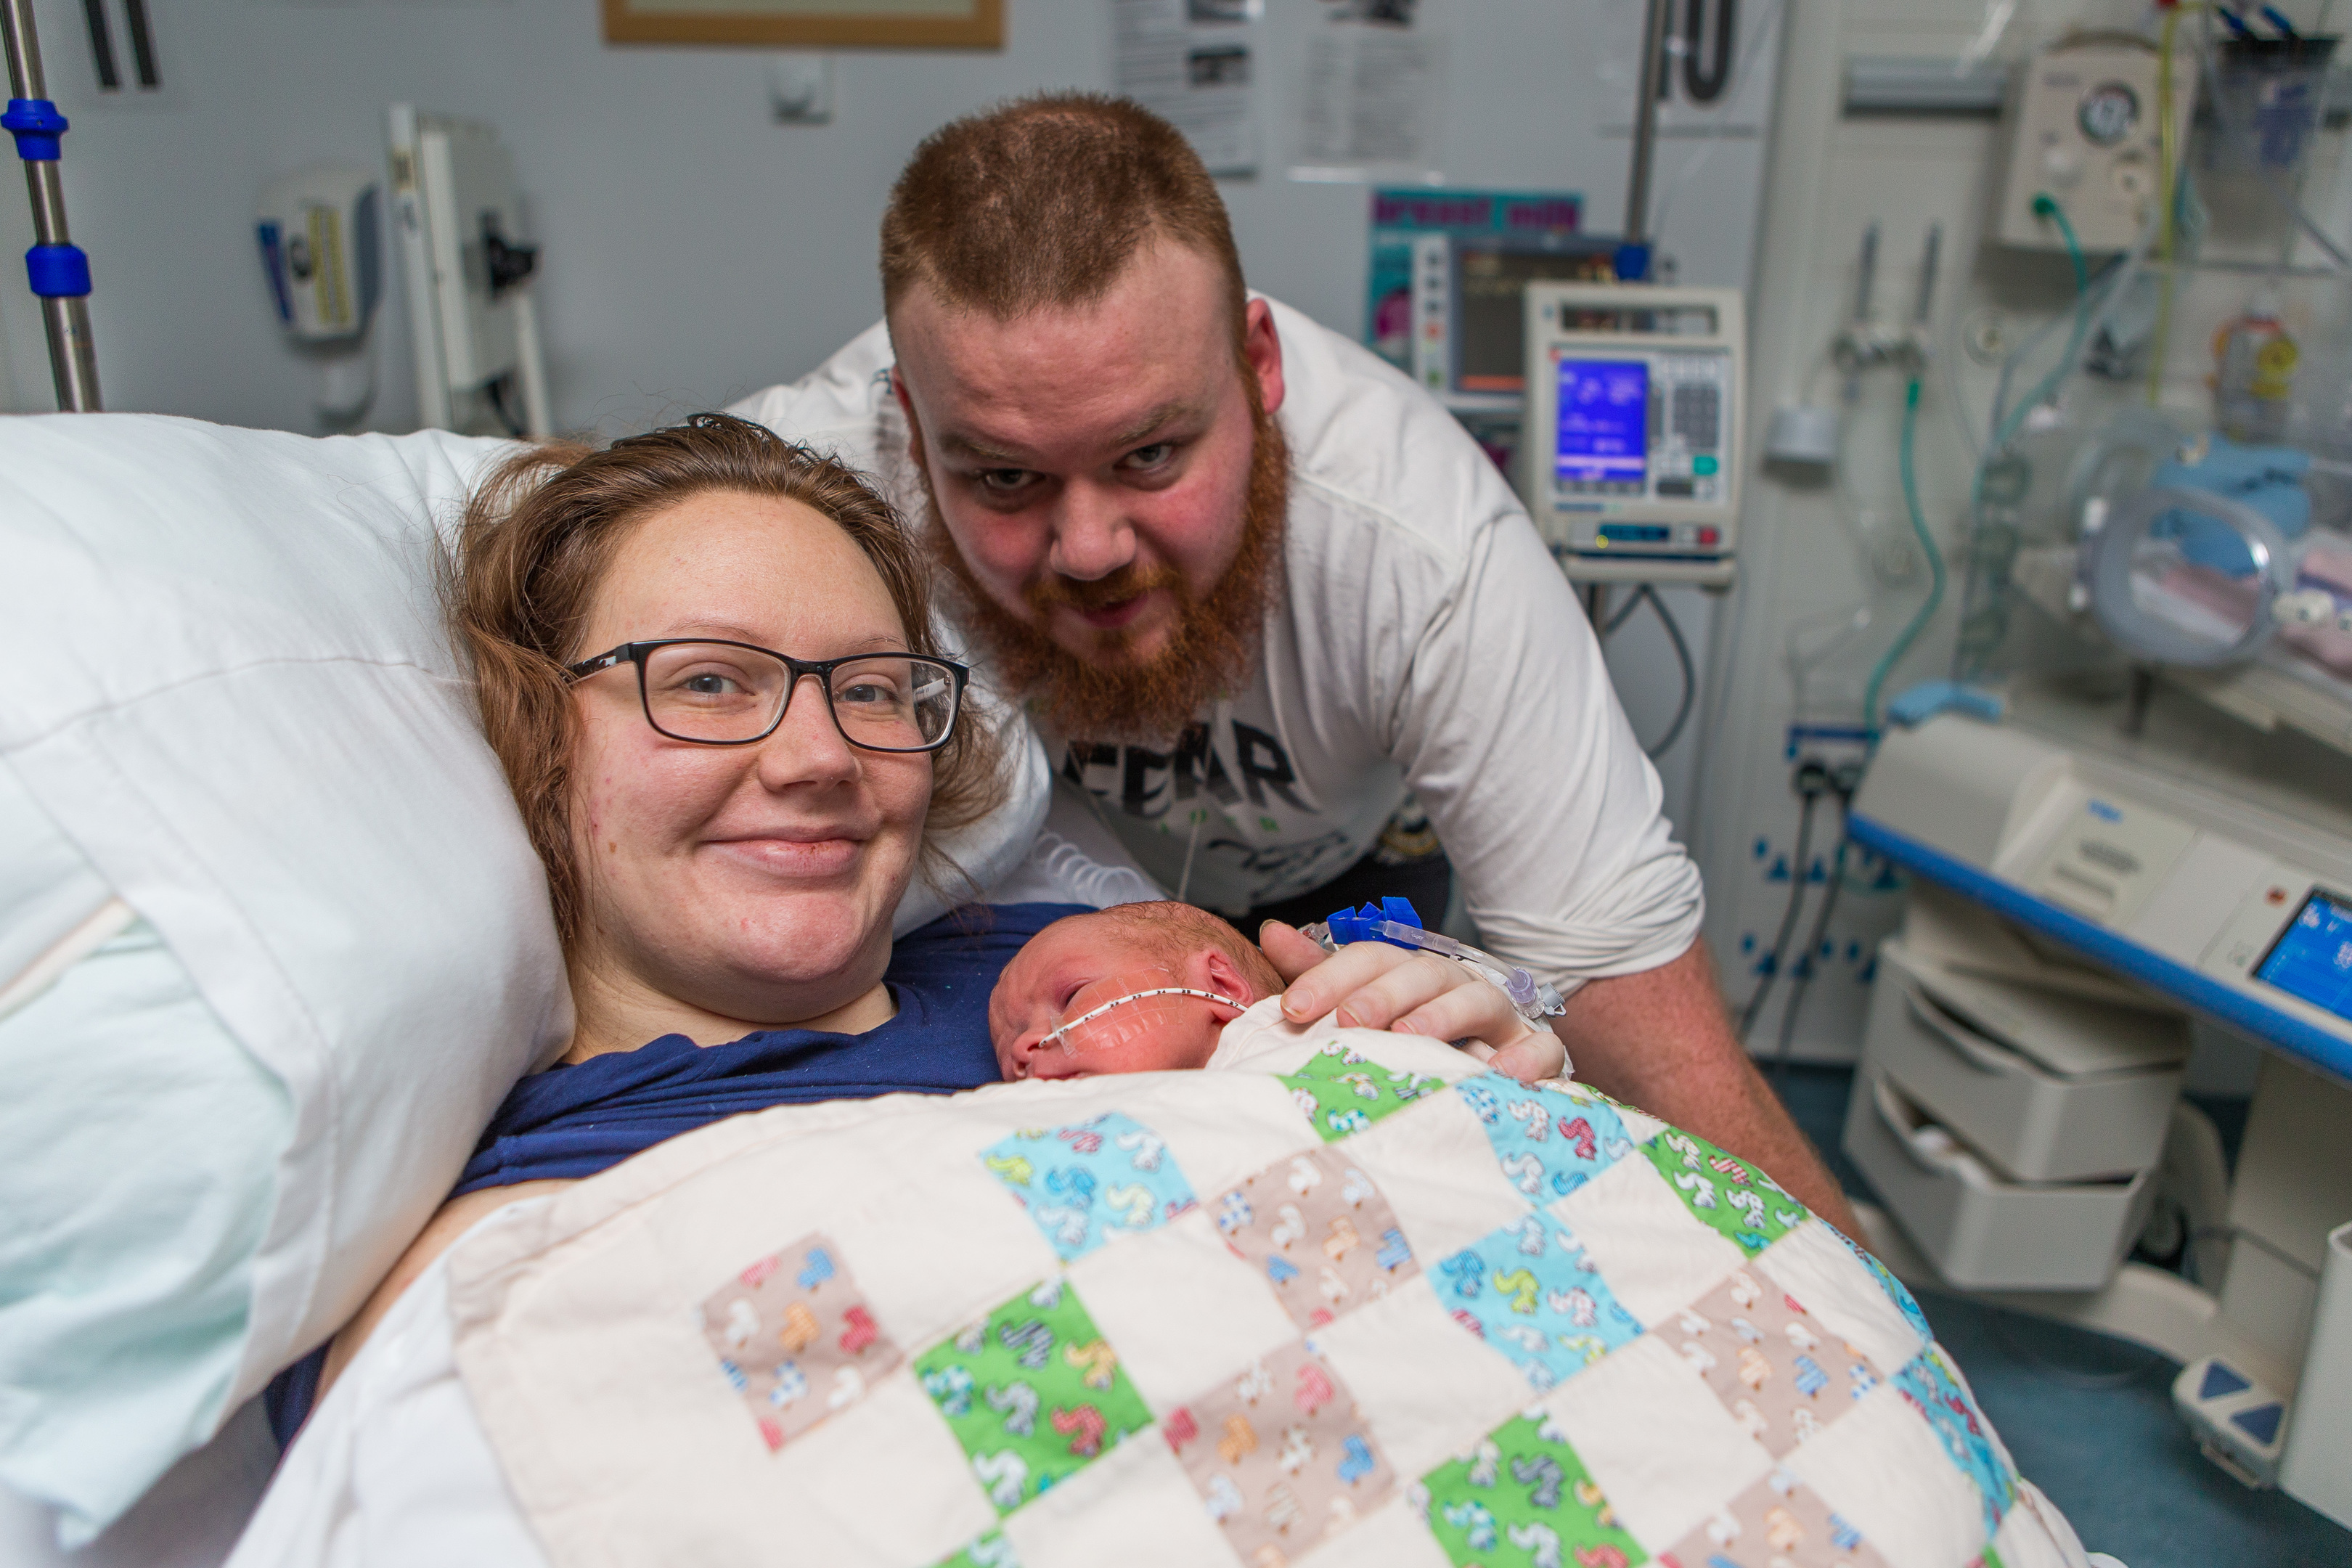 Stacey Macmillan and Jed Edgar with their baby boy.